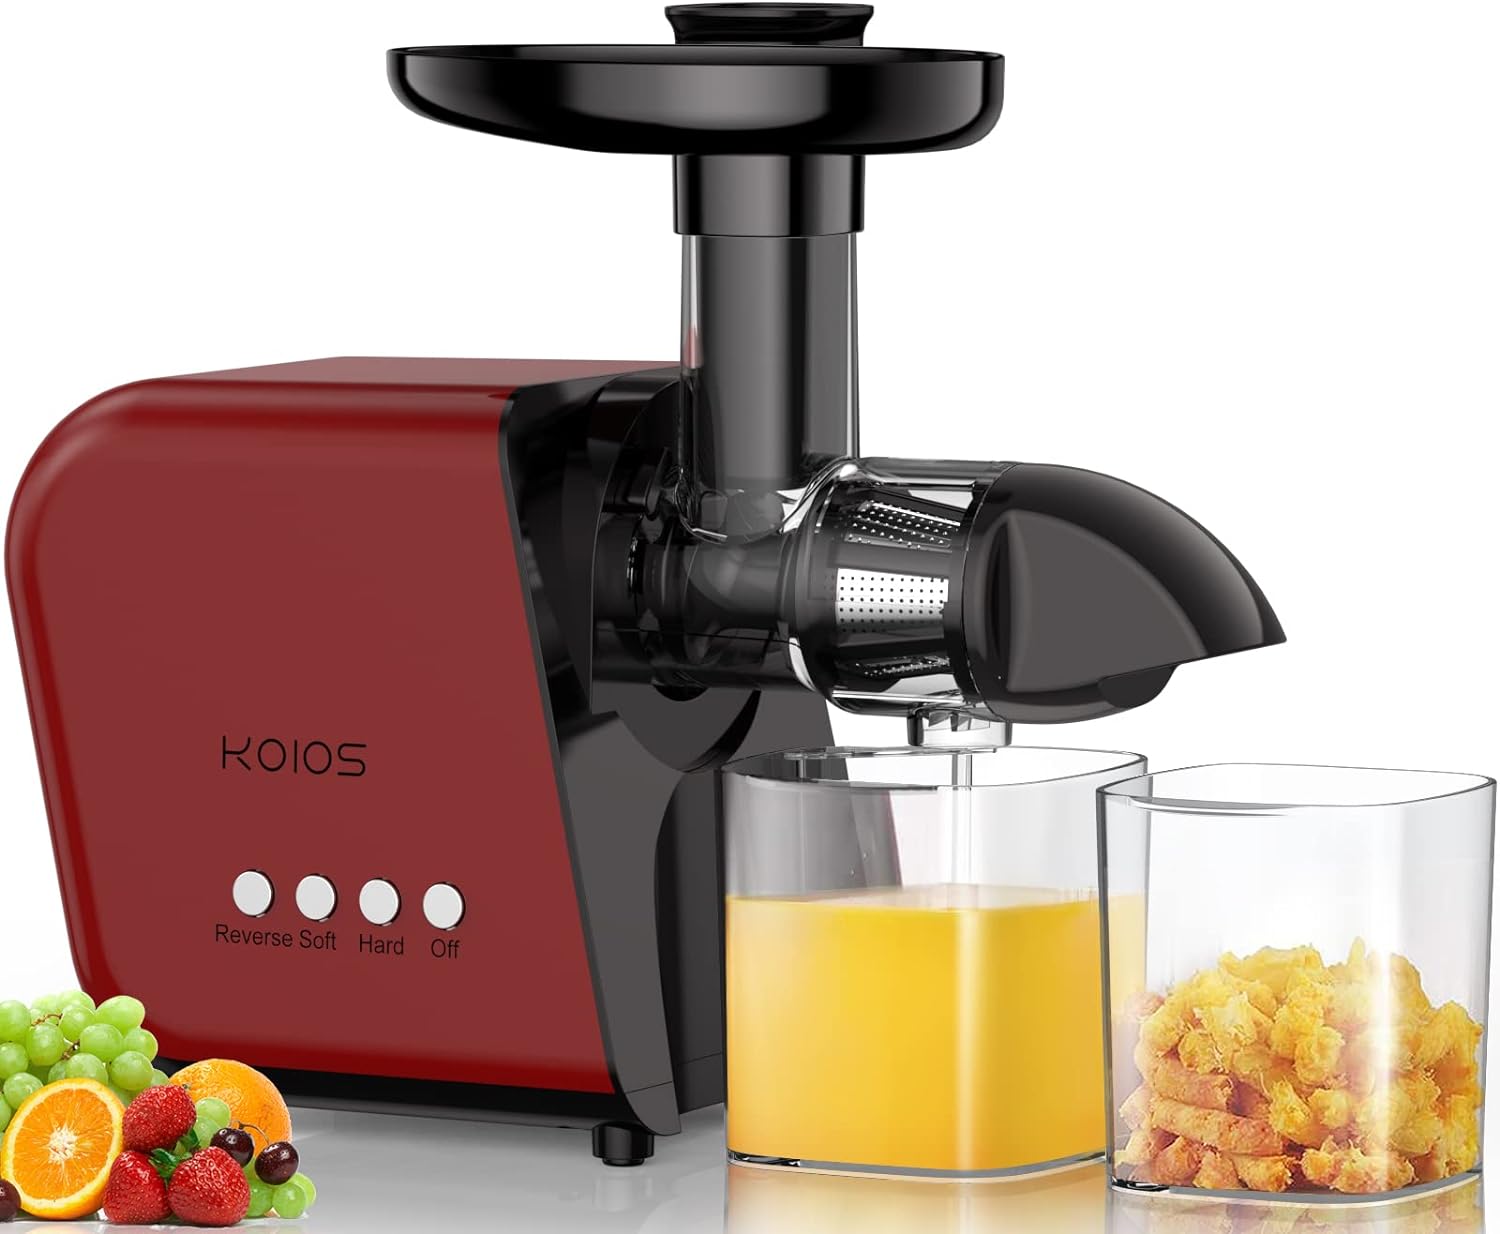 Top 15 Juice Extractors and their Prices in Nigeria